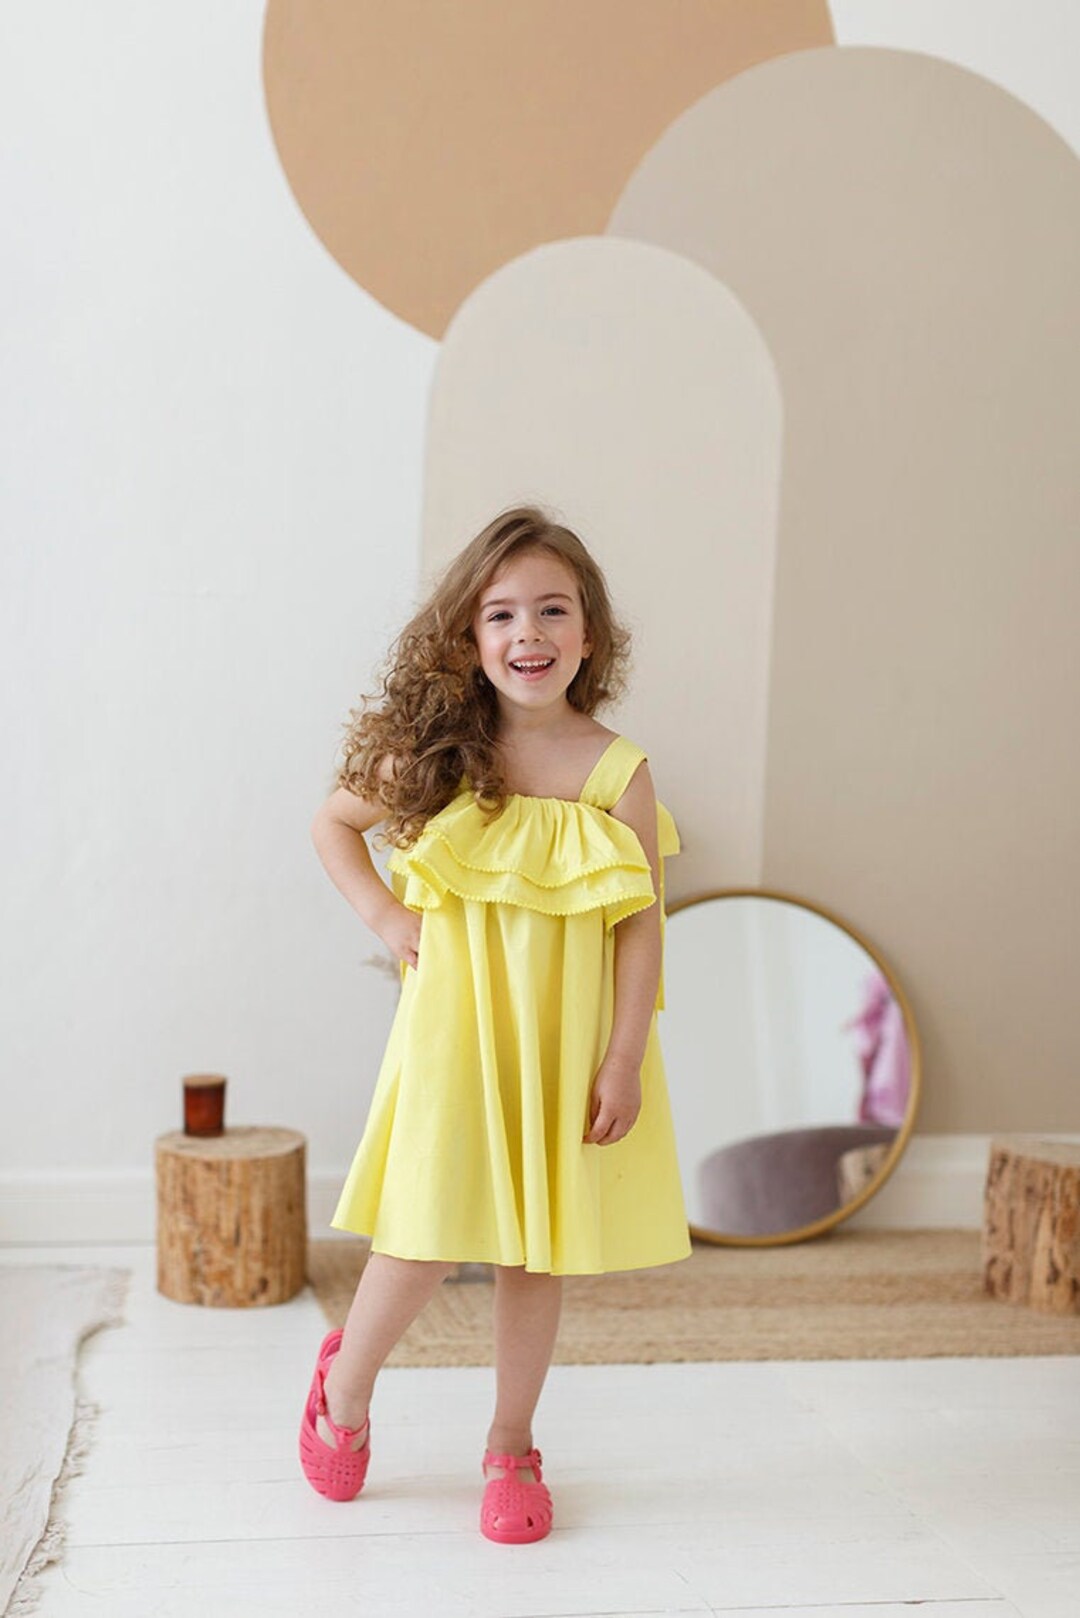 Buy Dishanarita Baby Girl Designer Gown for one Year Length 22 Chest 20  Yellow at Amazon.in